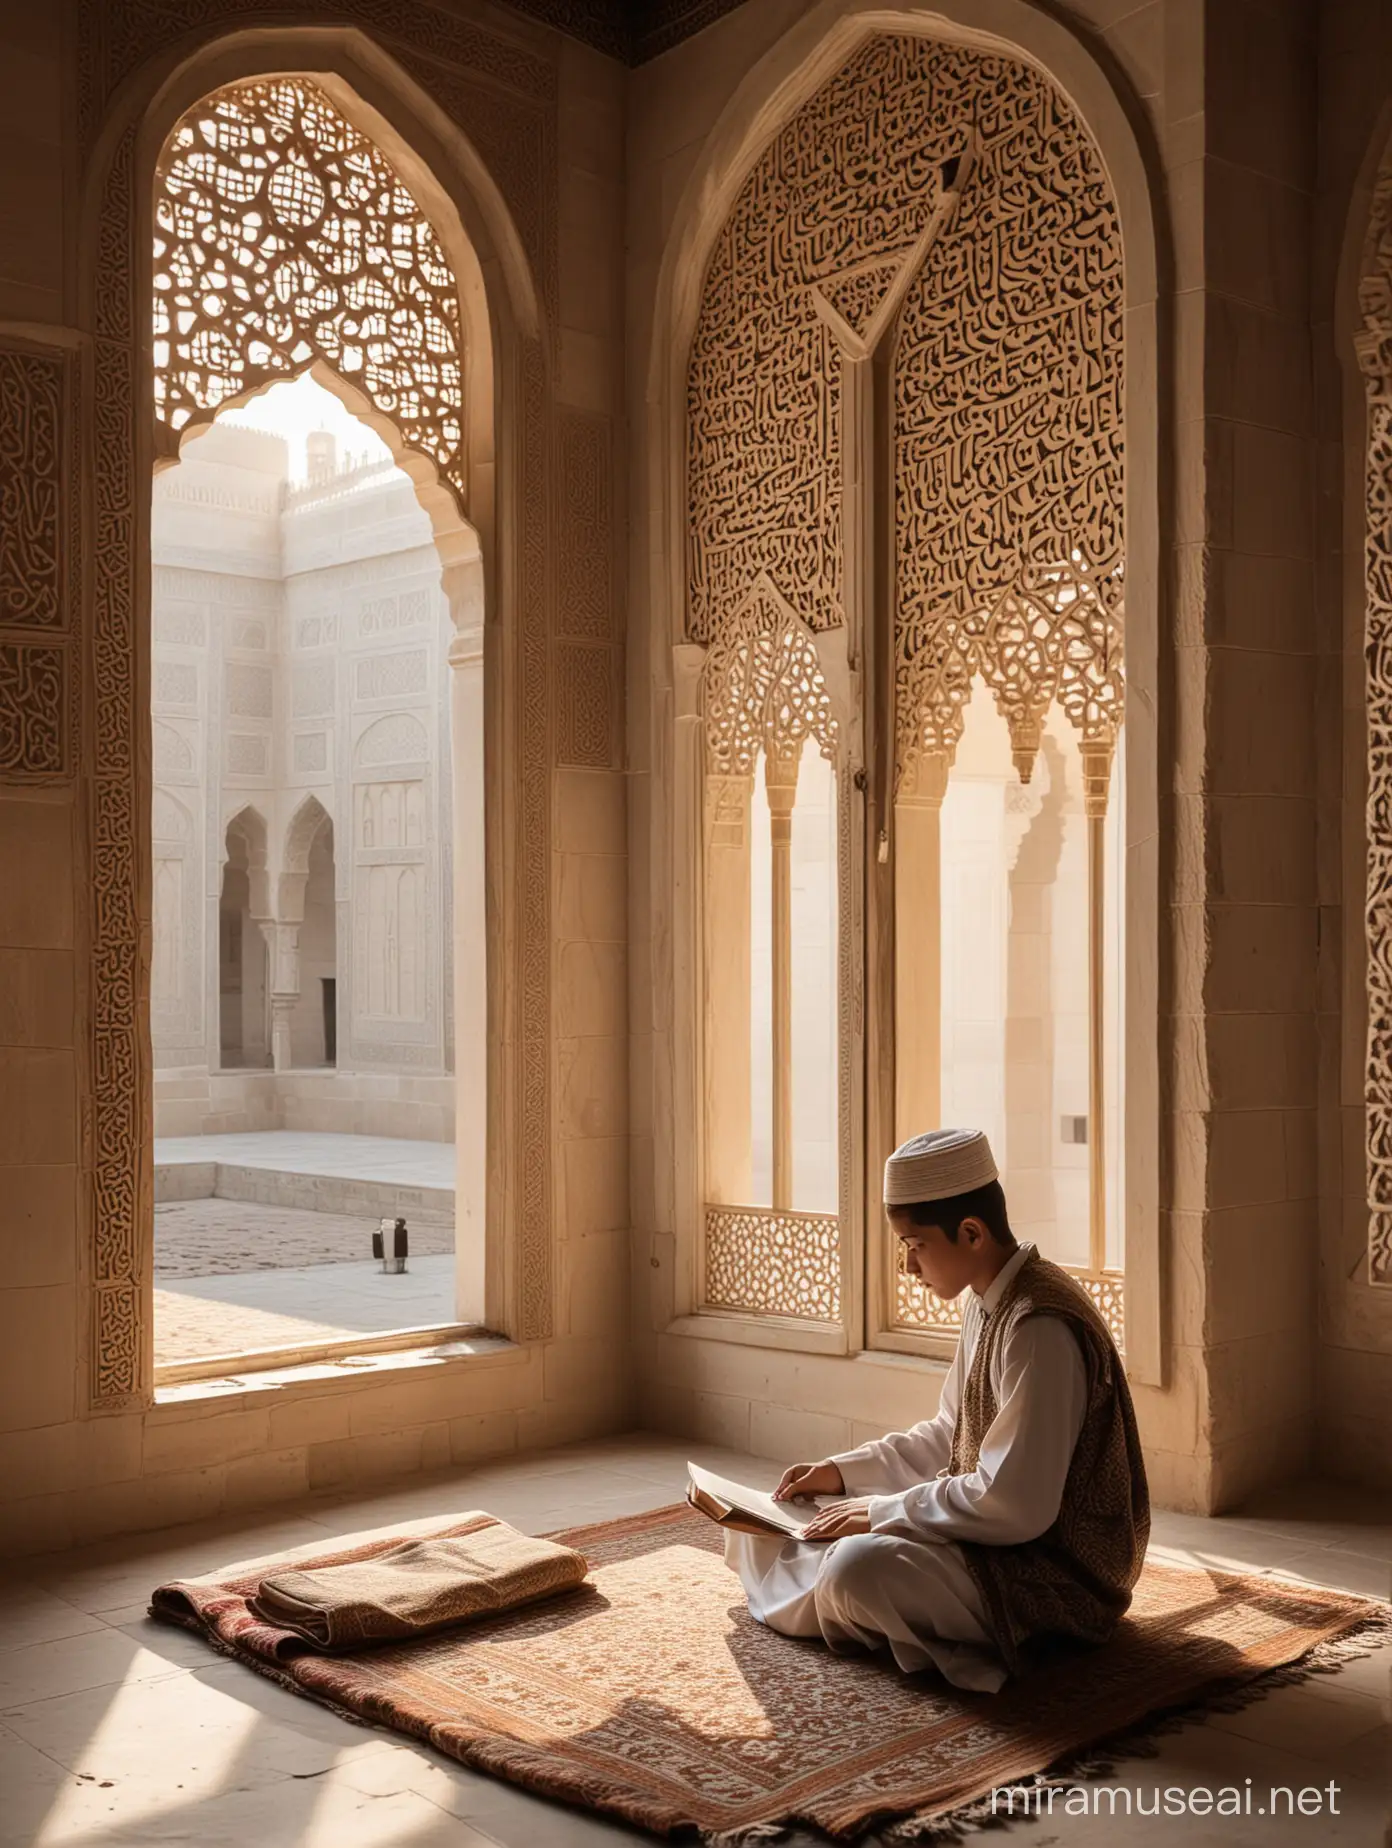 A muslim boy reading quran in ramadan,in 12th century era,in a mosque which is finely architectured,he is sitting behind a large window where light coming from the holes of the window,he is wearing traditional muslim cloth,the time is early morning, 